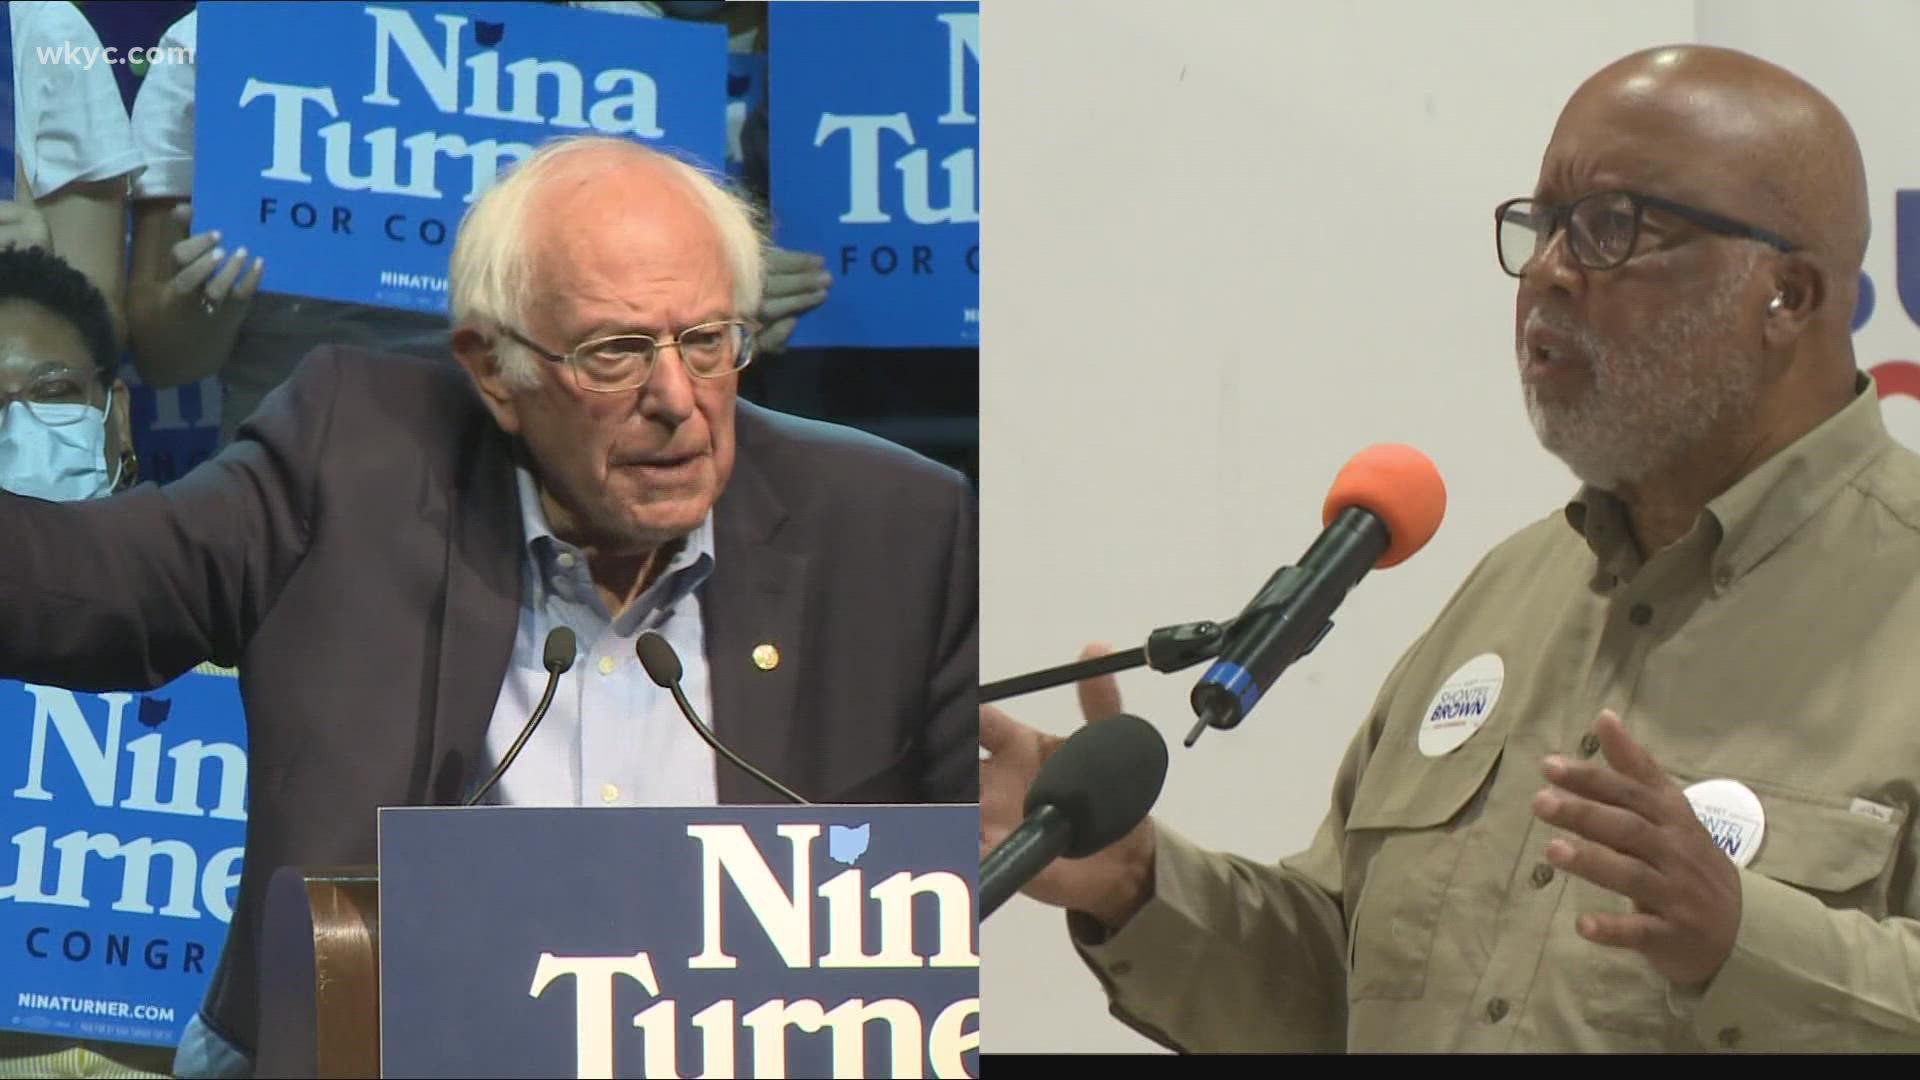 U.S. Sen. Bernie Sanders stumped for Turner, while Rep. Jim Clyburn and others were out for Brown.